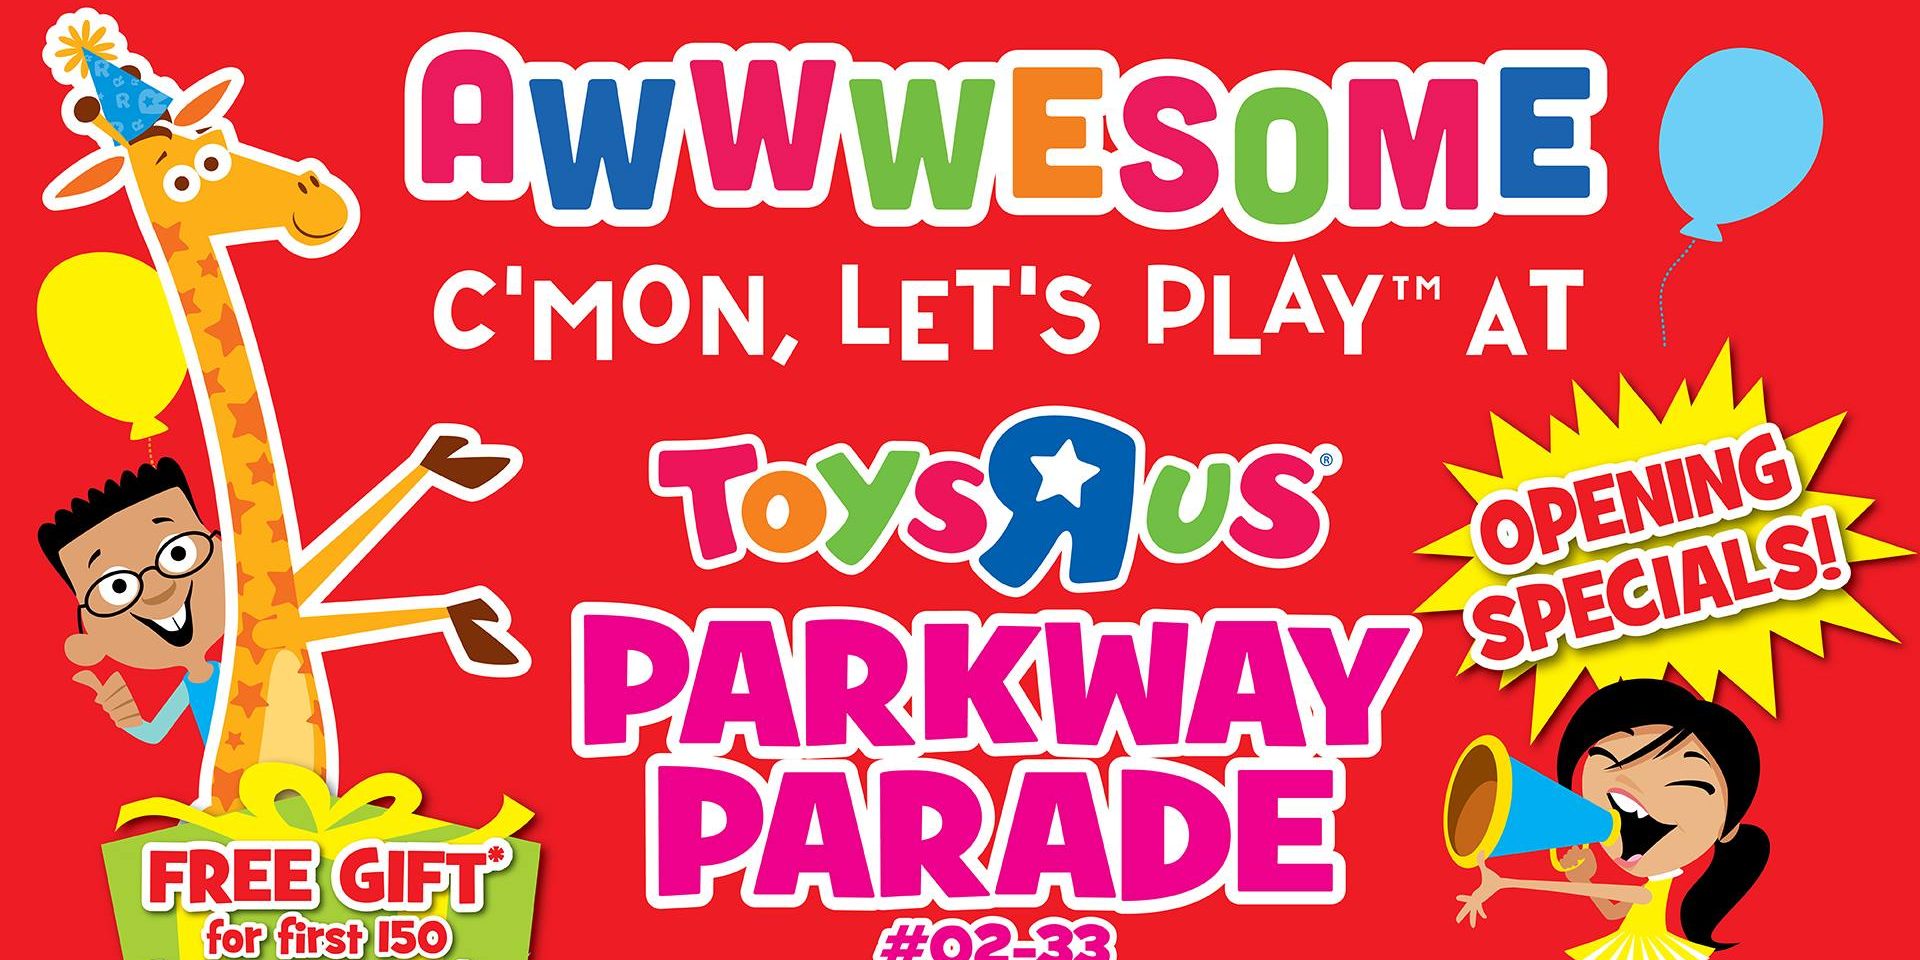 Toys “R” Us Singapore Parkway Parade Opening Special Promotion 30 Dec 2016 – 2 Jan 2017